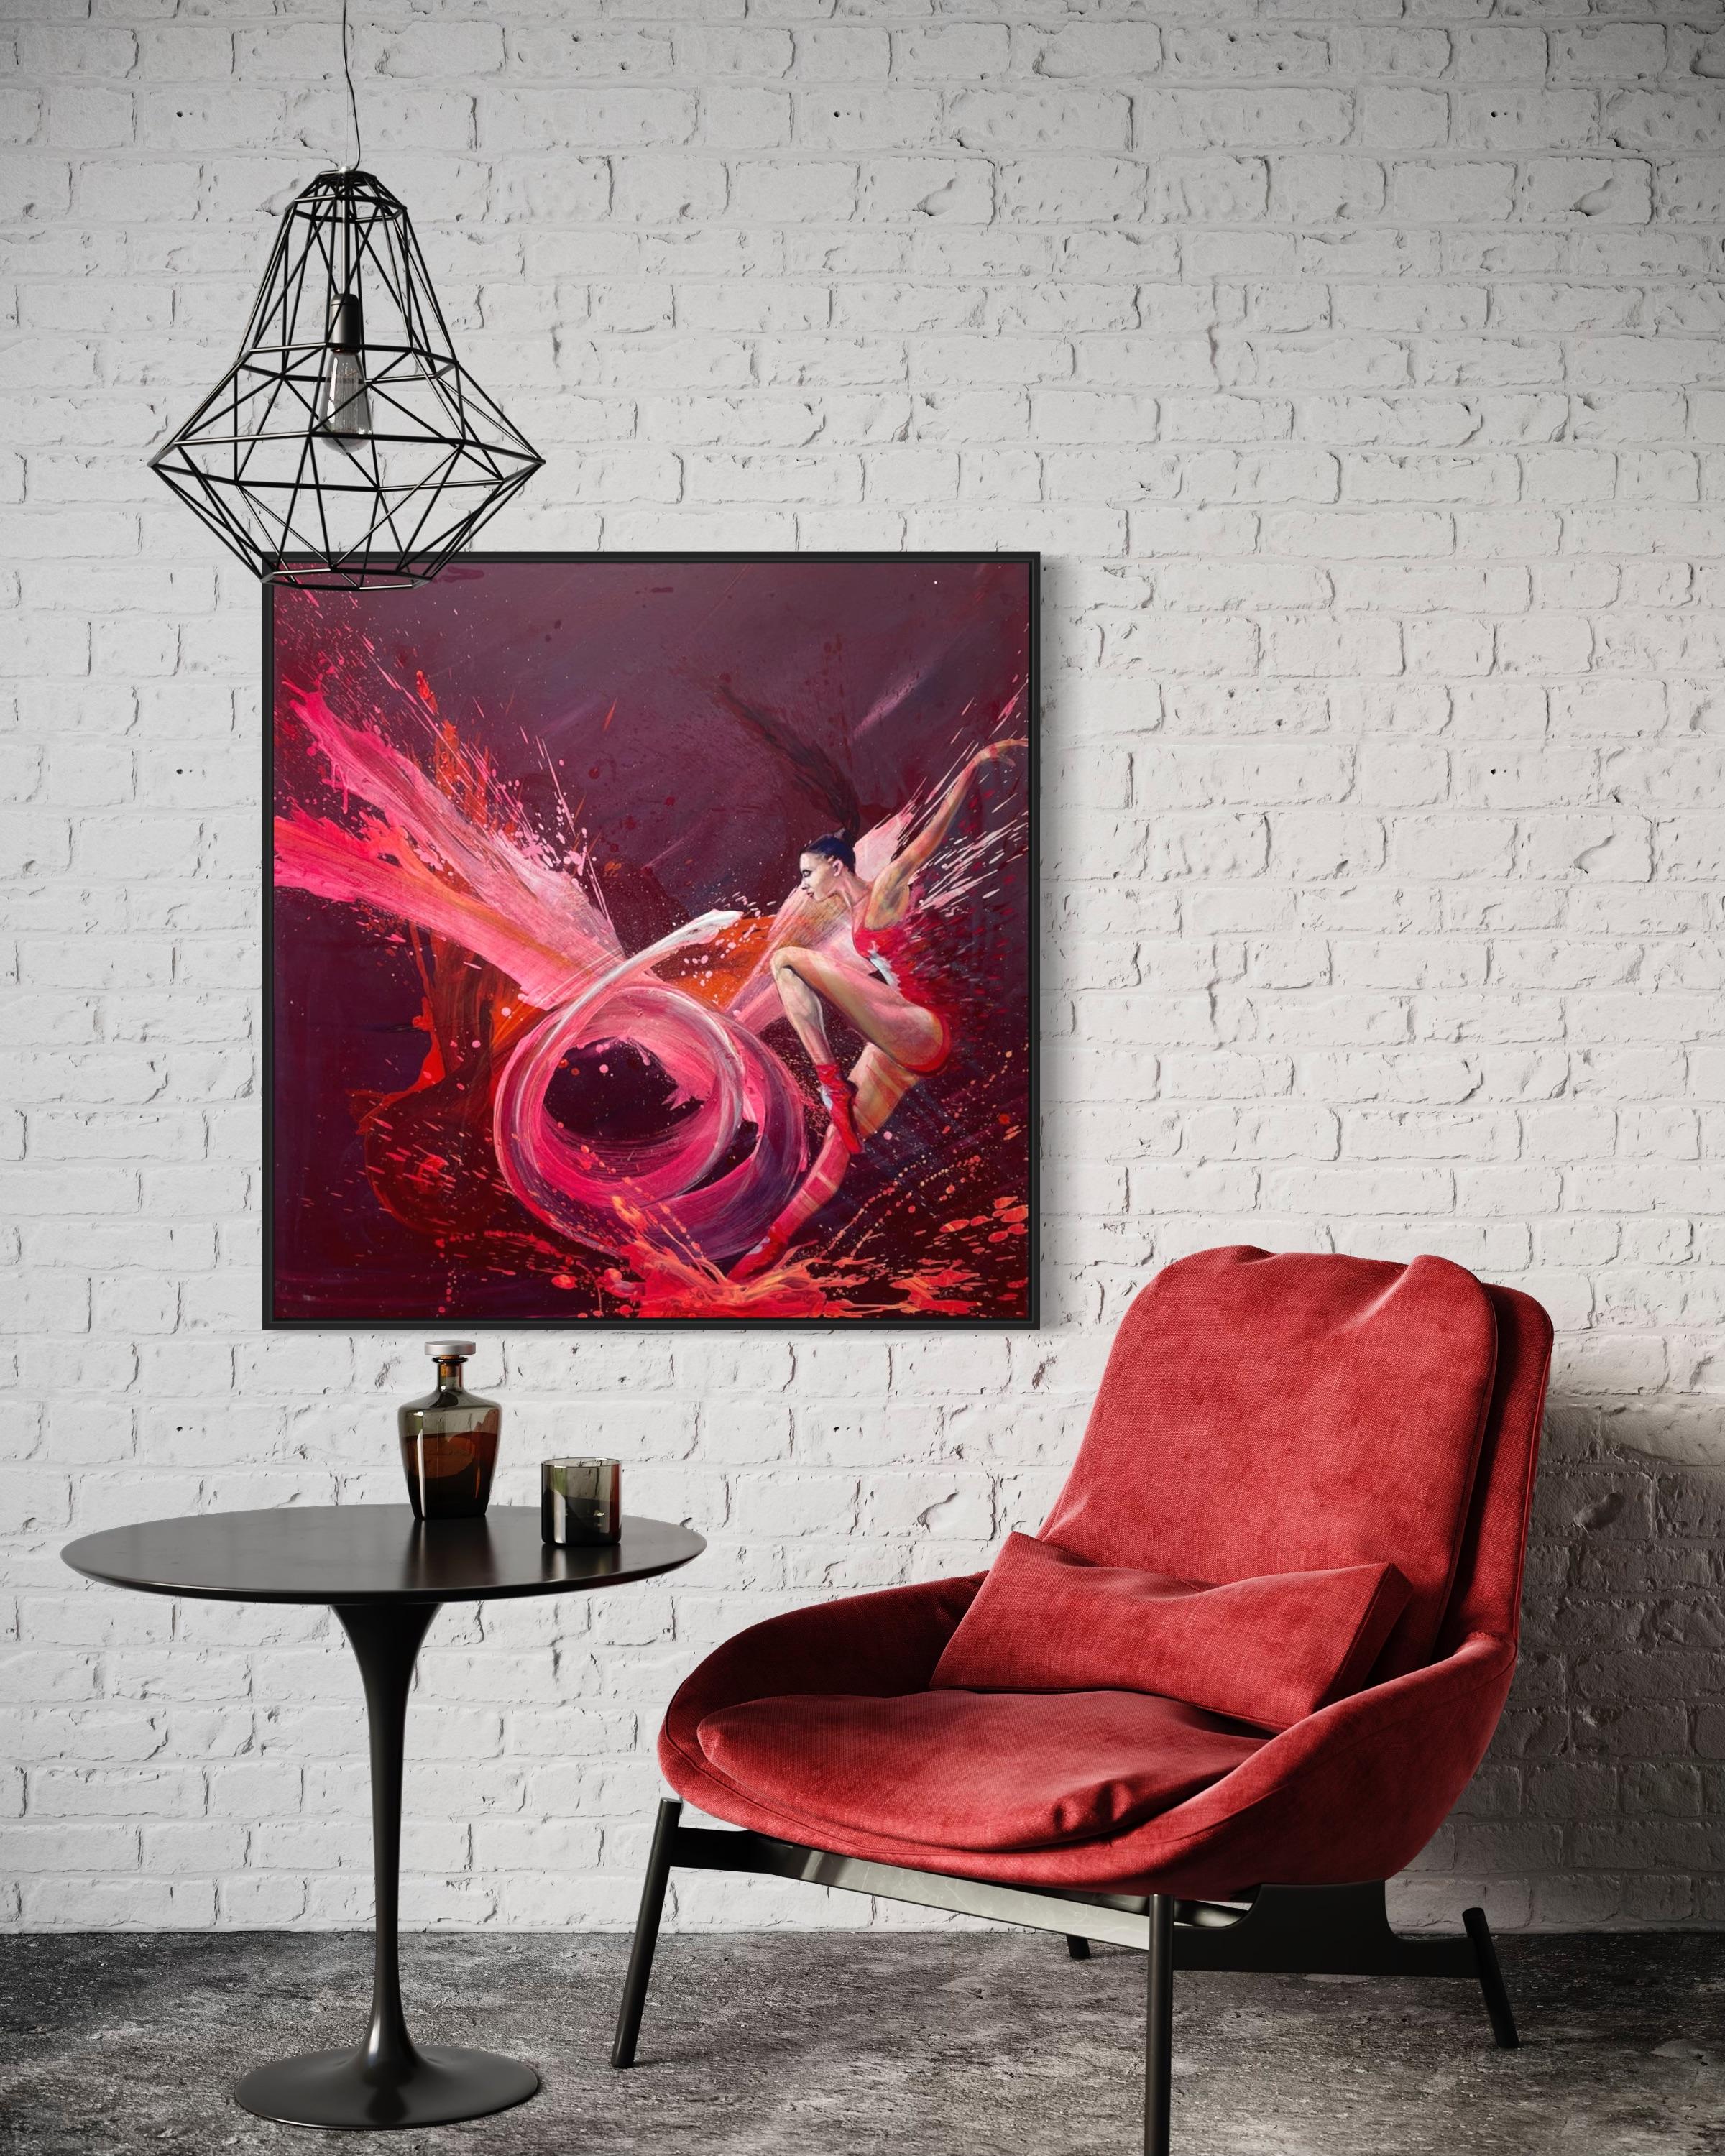 'The Ballerina' - Red & White Contemporary Figurative Abstract by Avelino - Painting by Avelino Sanher